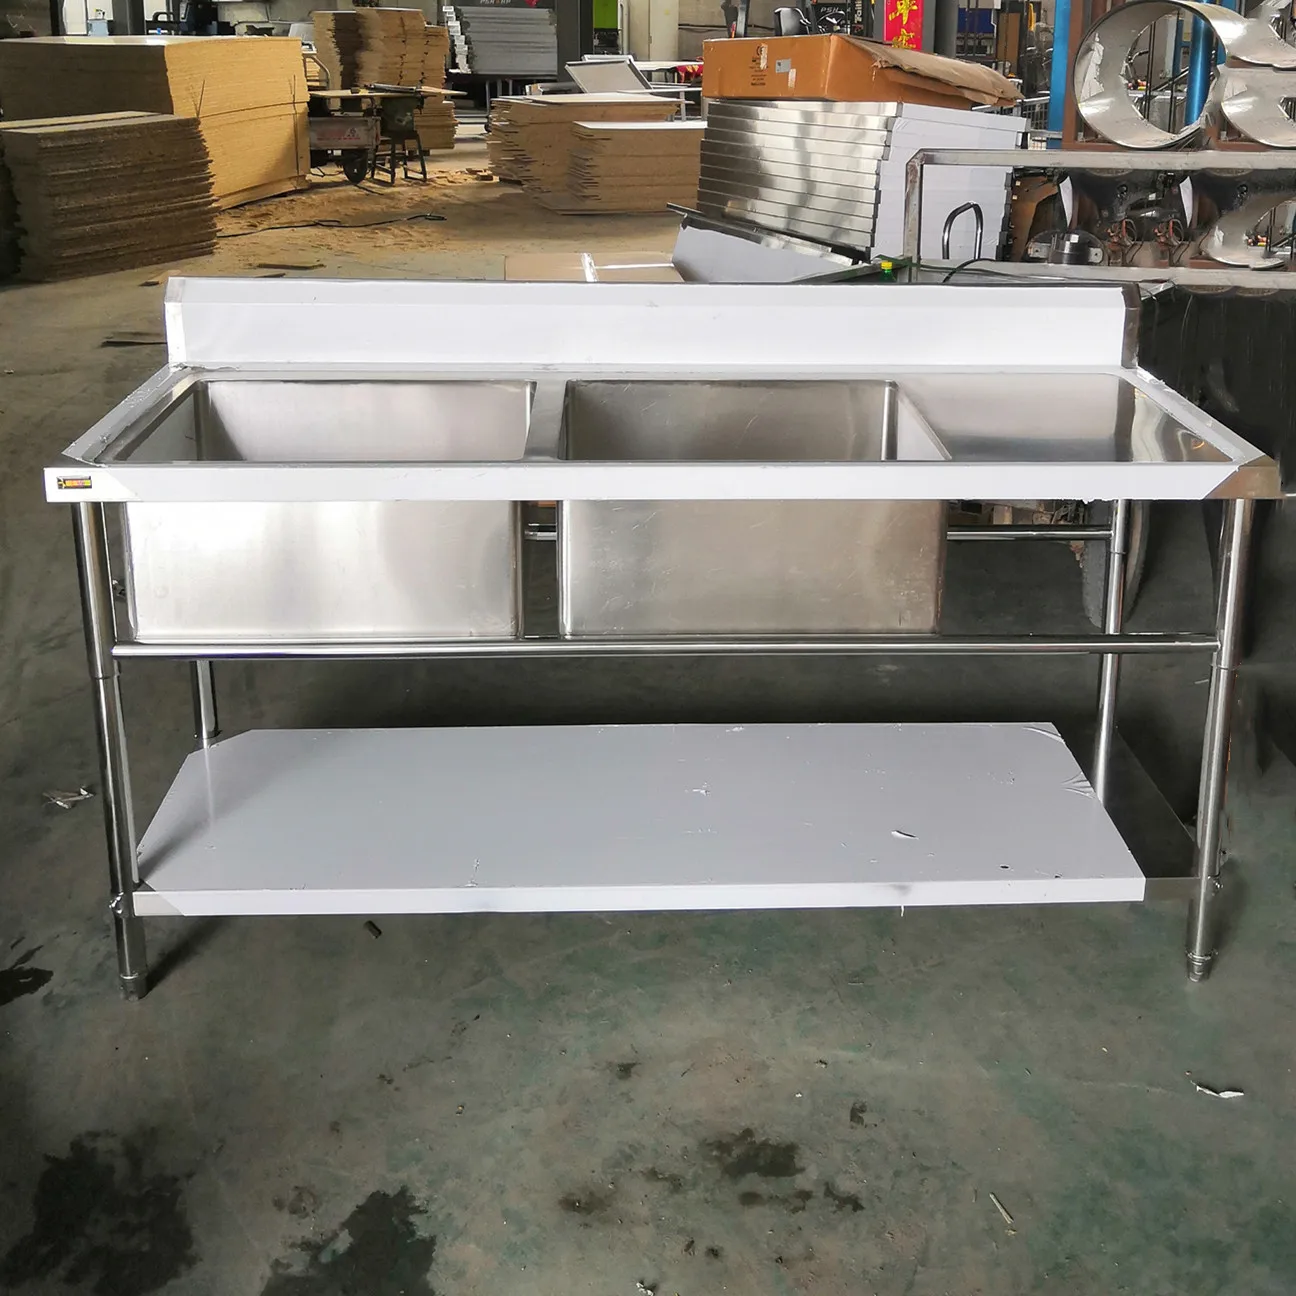 Restaurant Furniture Double Sink Stainless Steel/ Stainless Steel Kitchen Double Sink  With Right Drainboard